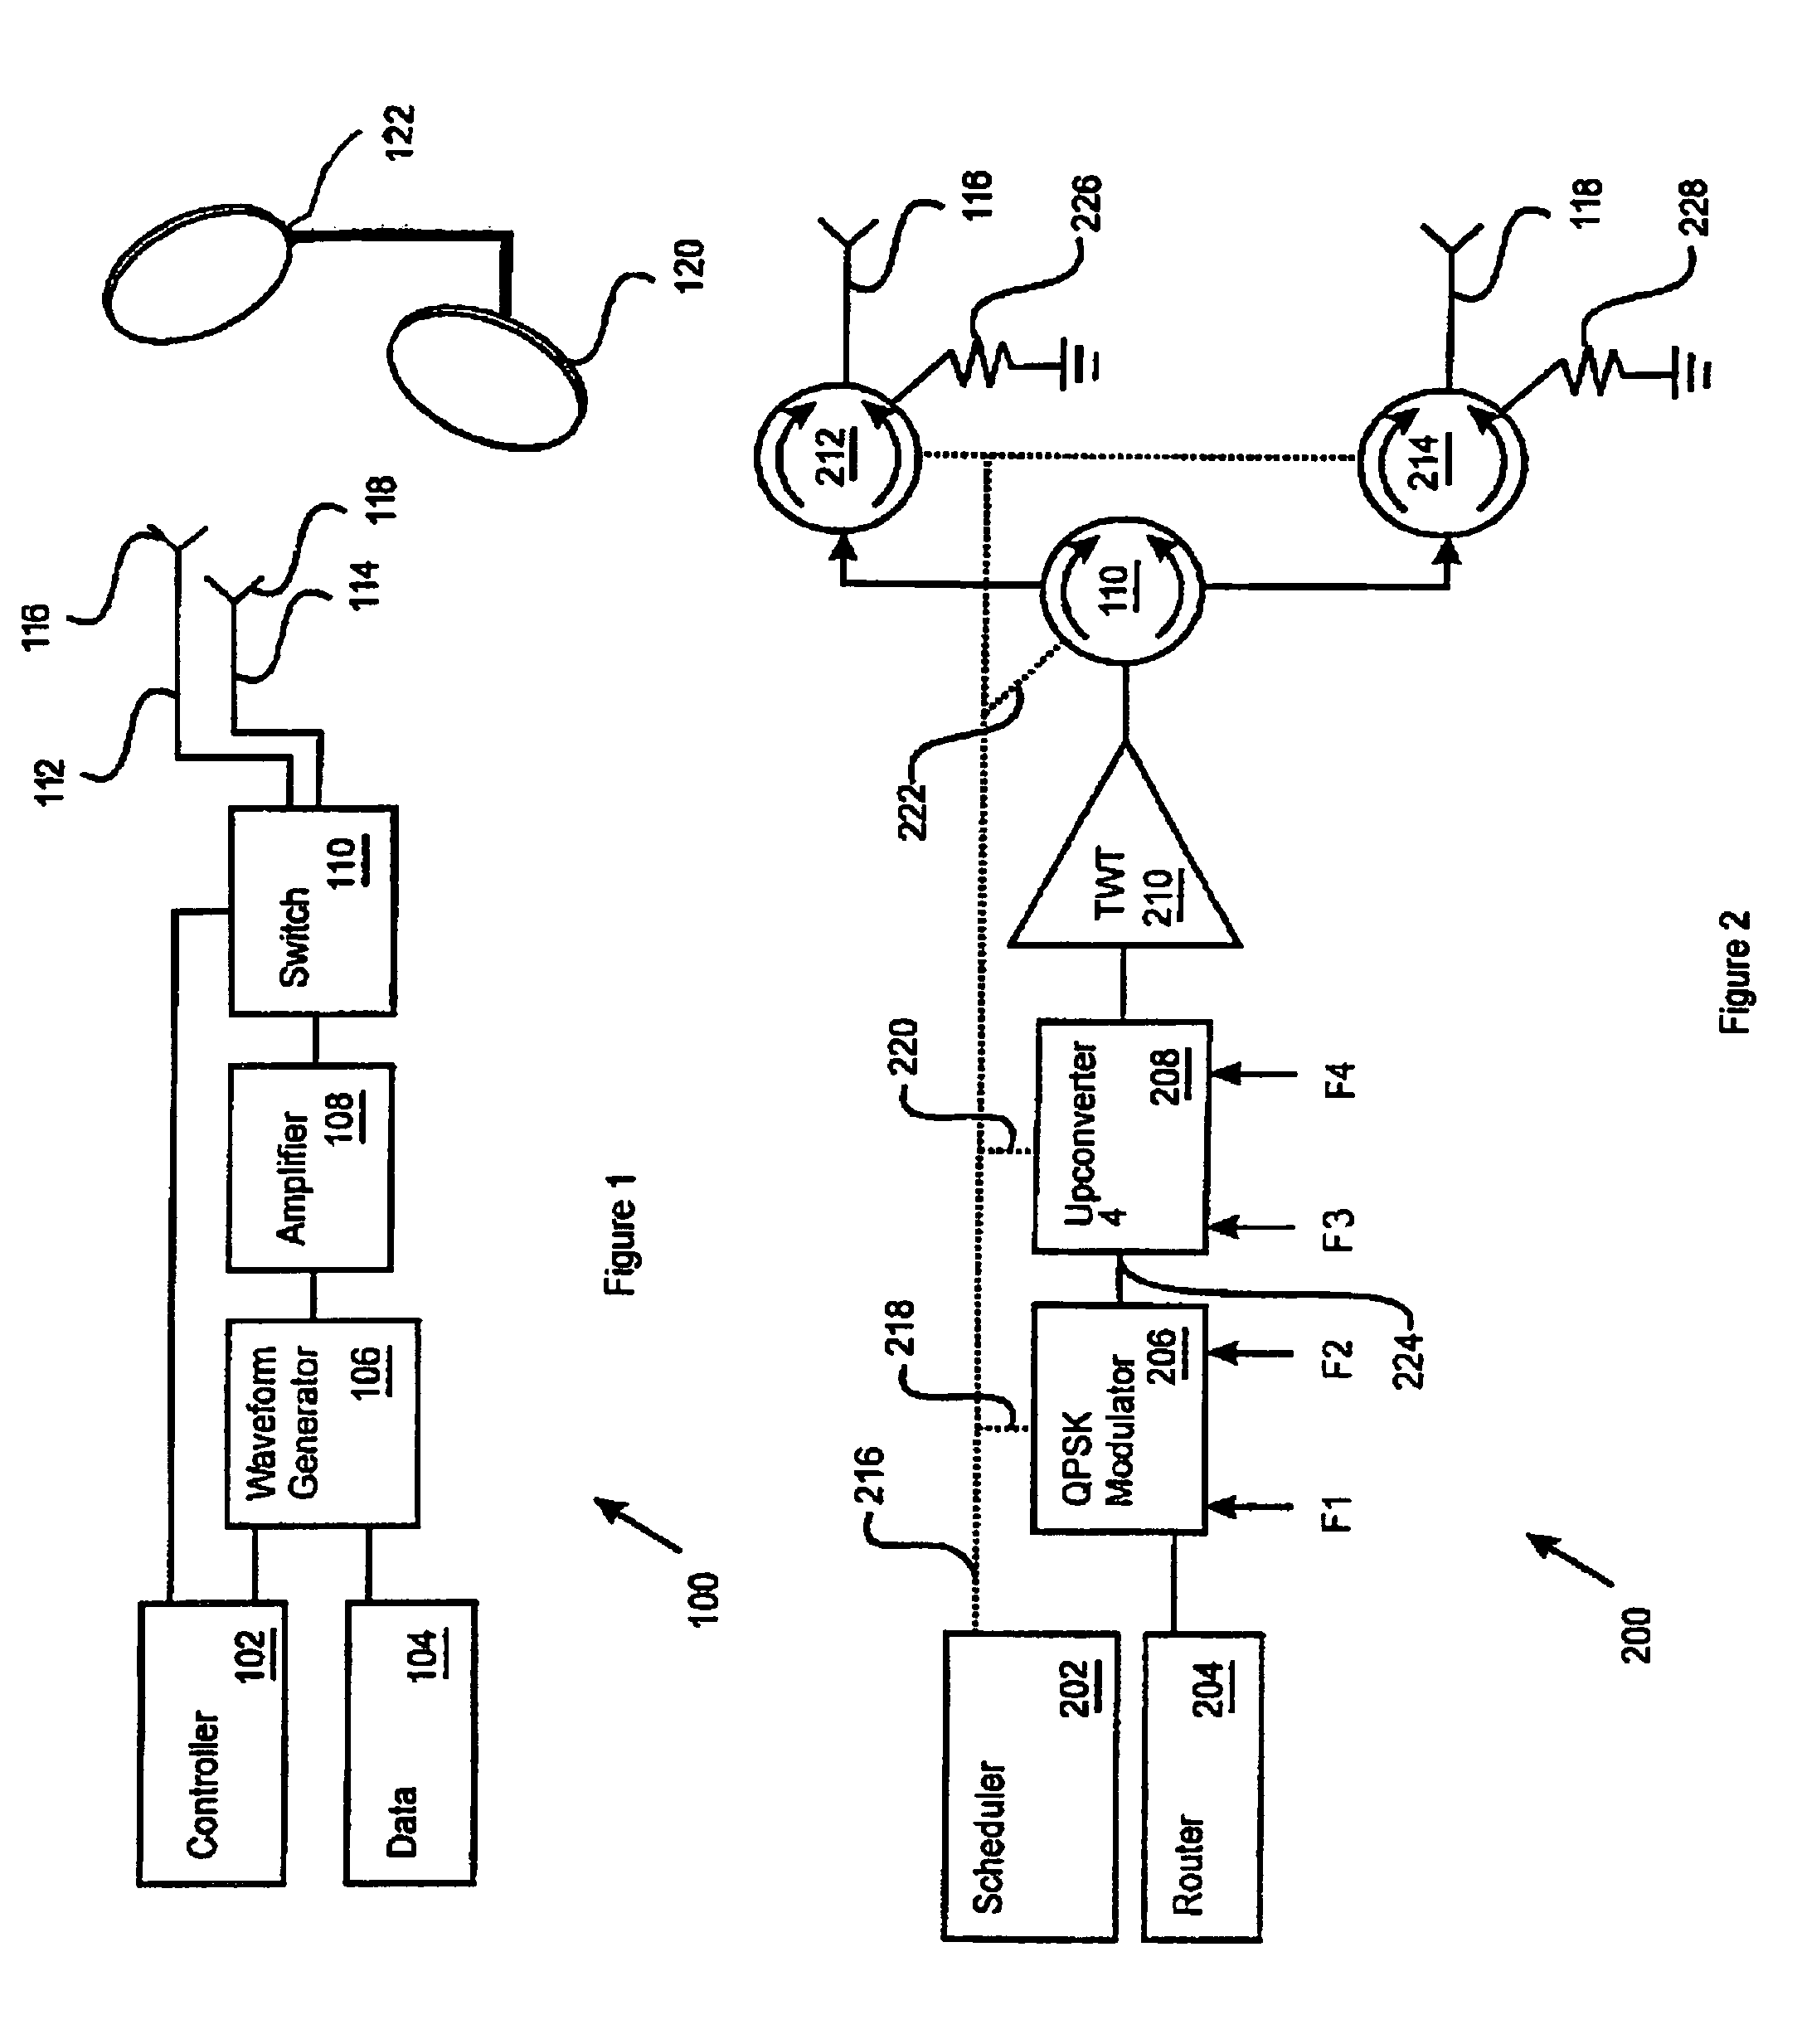 Beam hopping self addressed packet switched communication system with locally intelligent scheduling